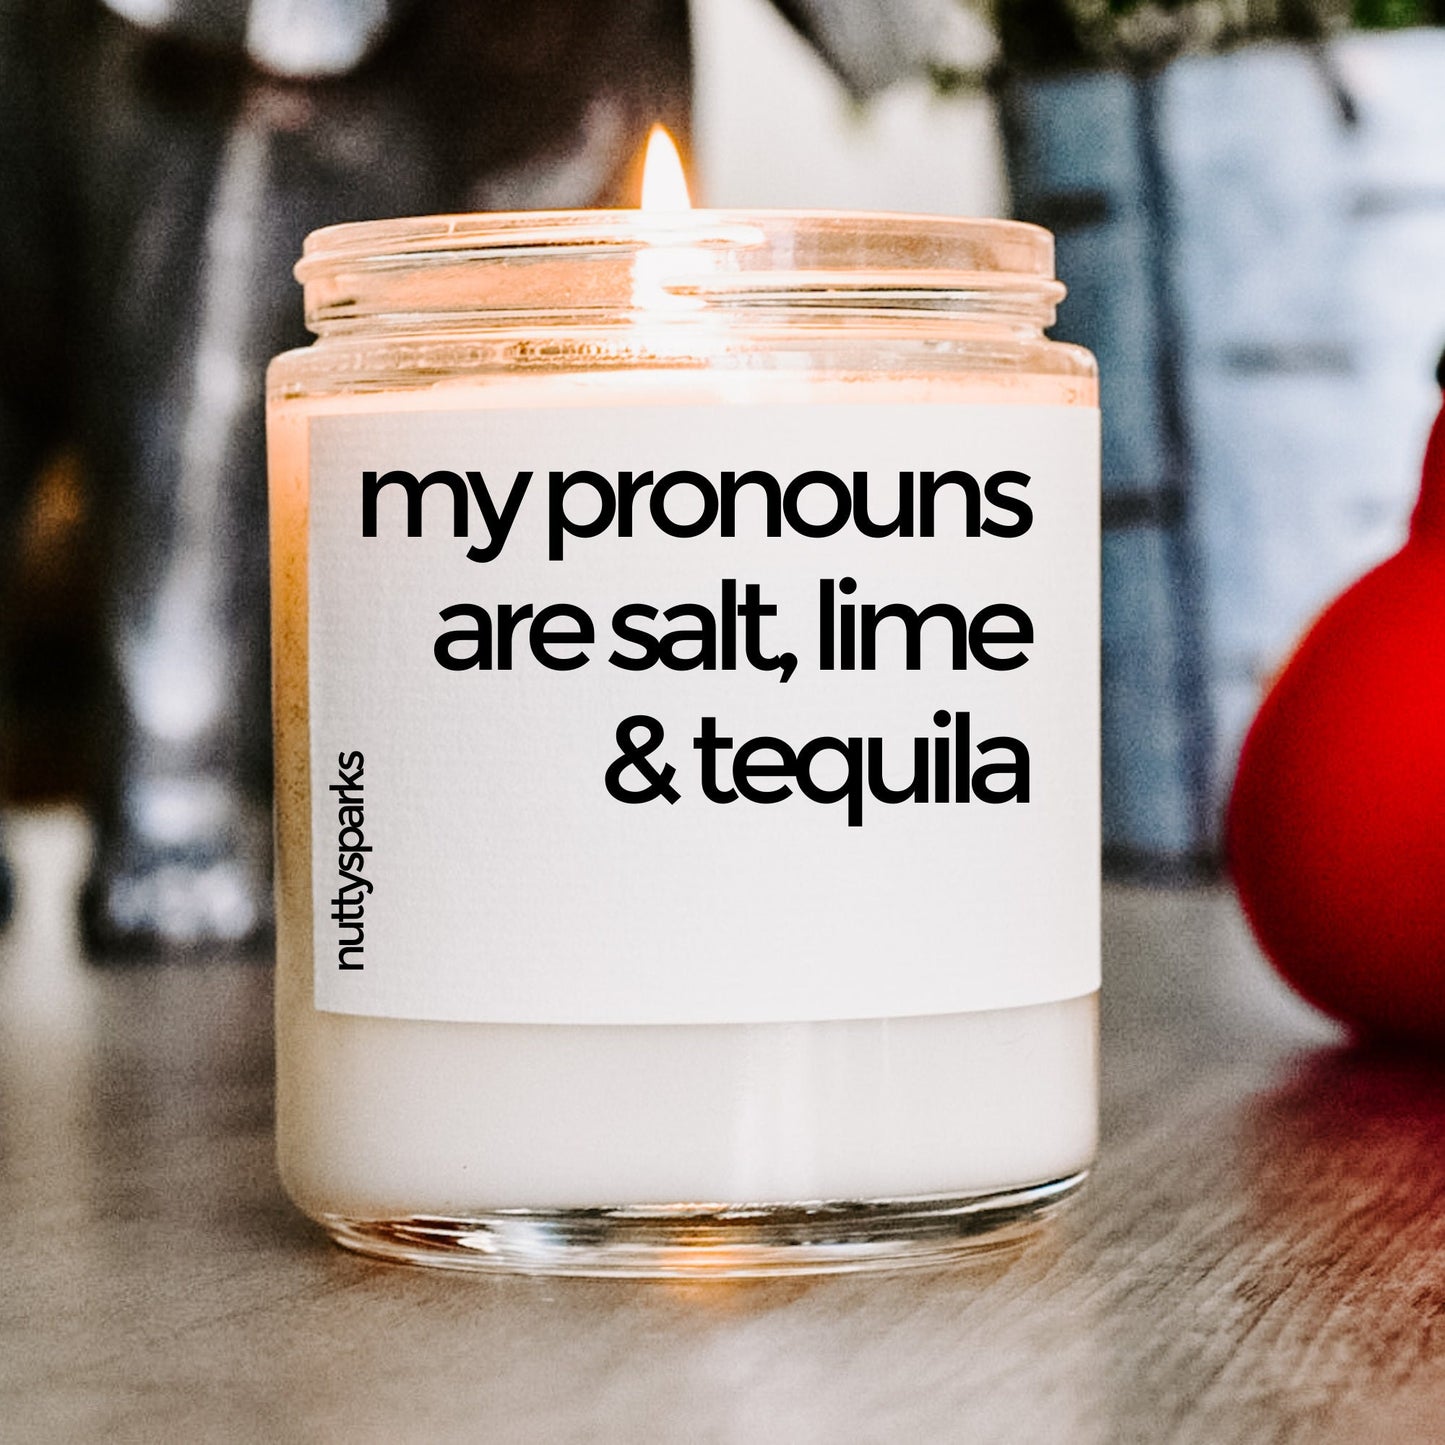 my pronouns are salt, lime, & tequila